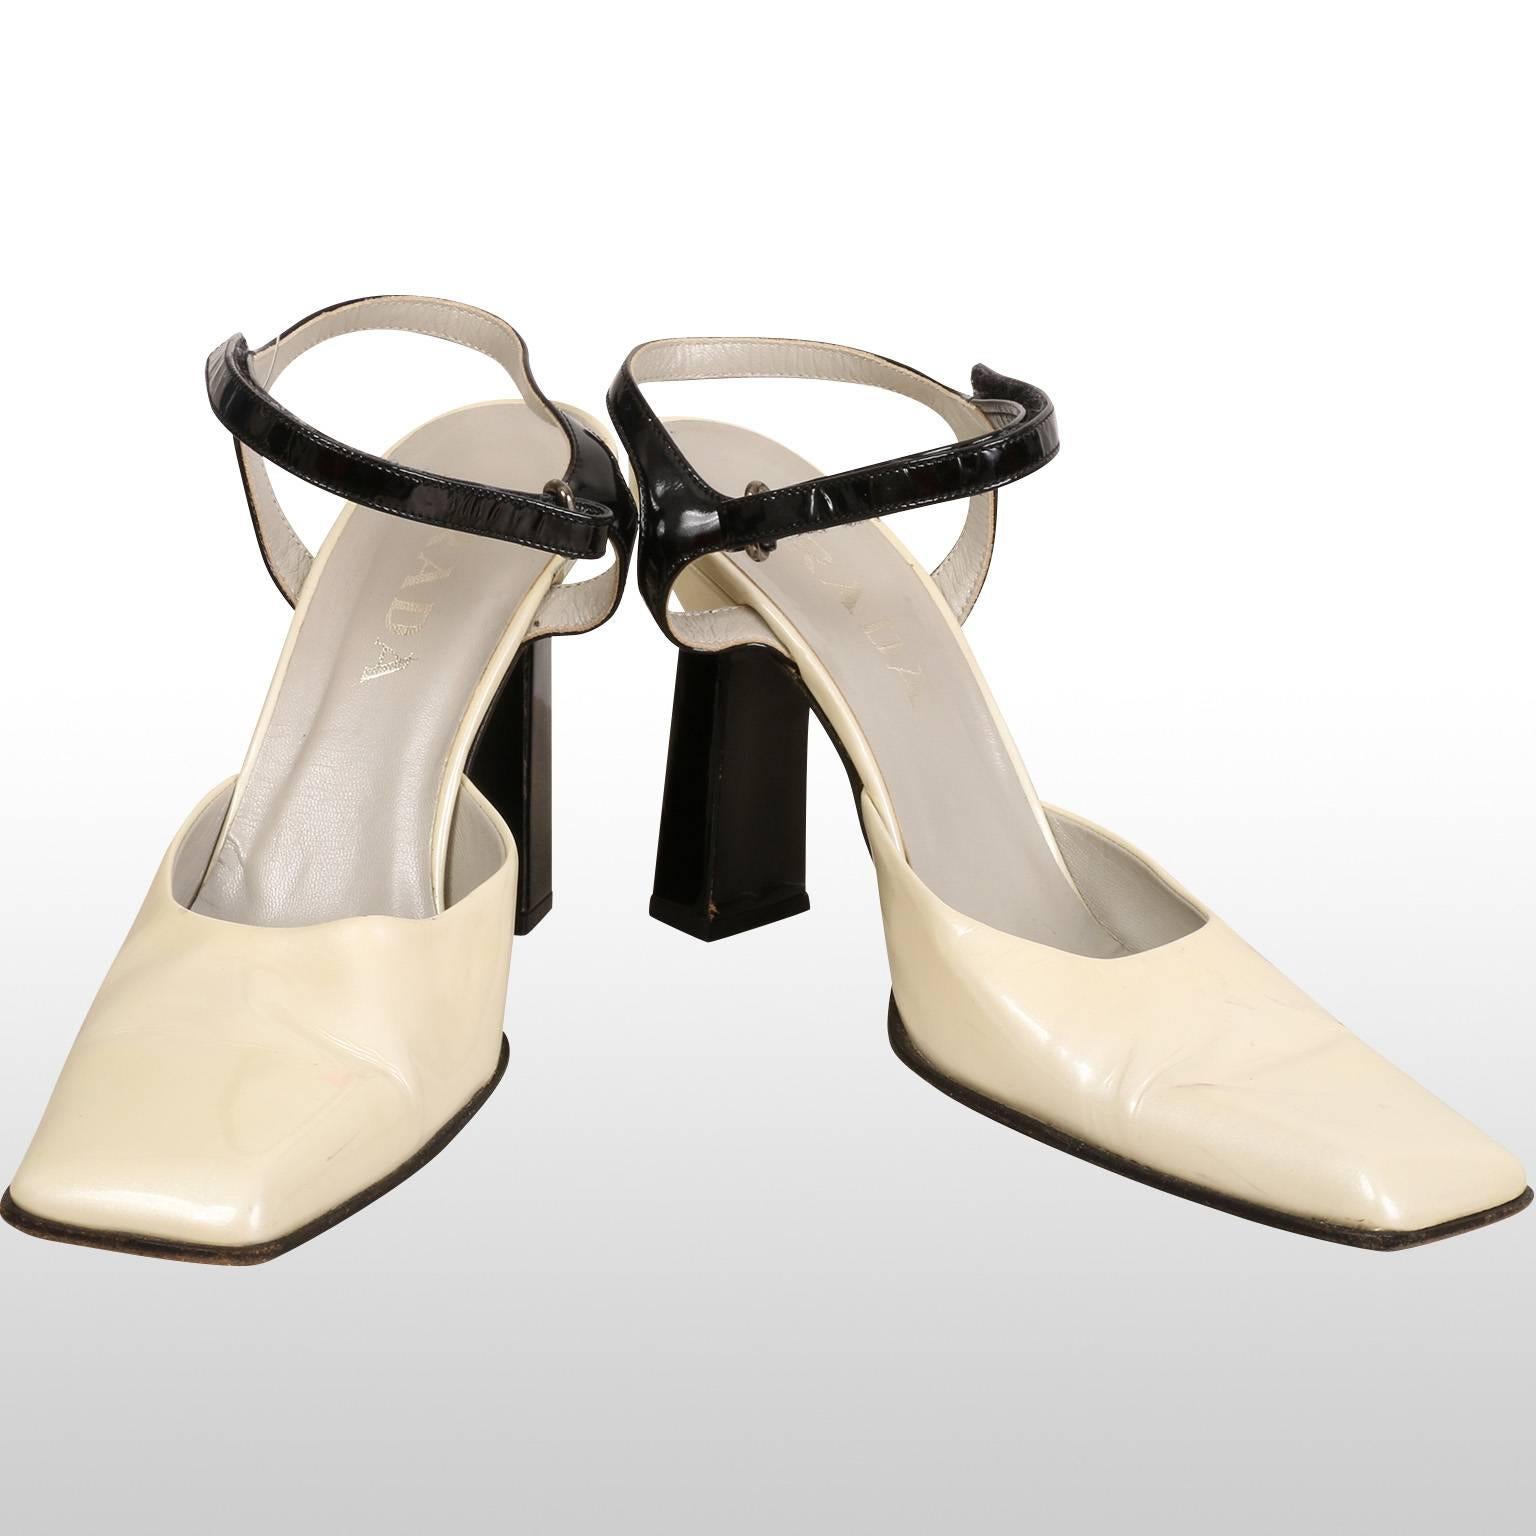 Prada Black and Ivory Heeled Sandals Size UK 6 In Excellent Condition For Sale In London, GB